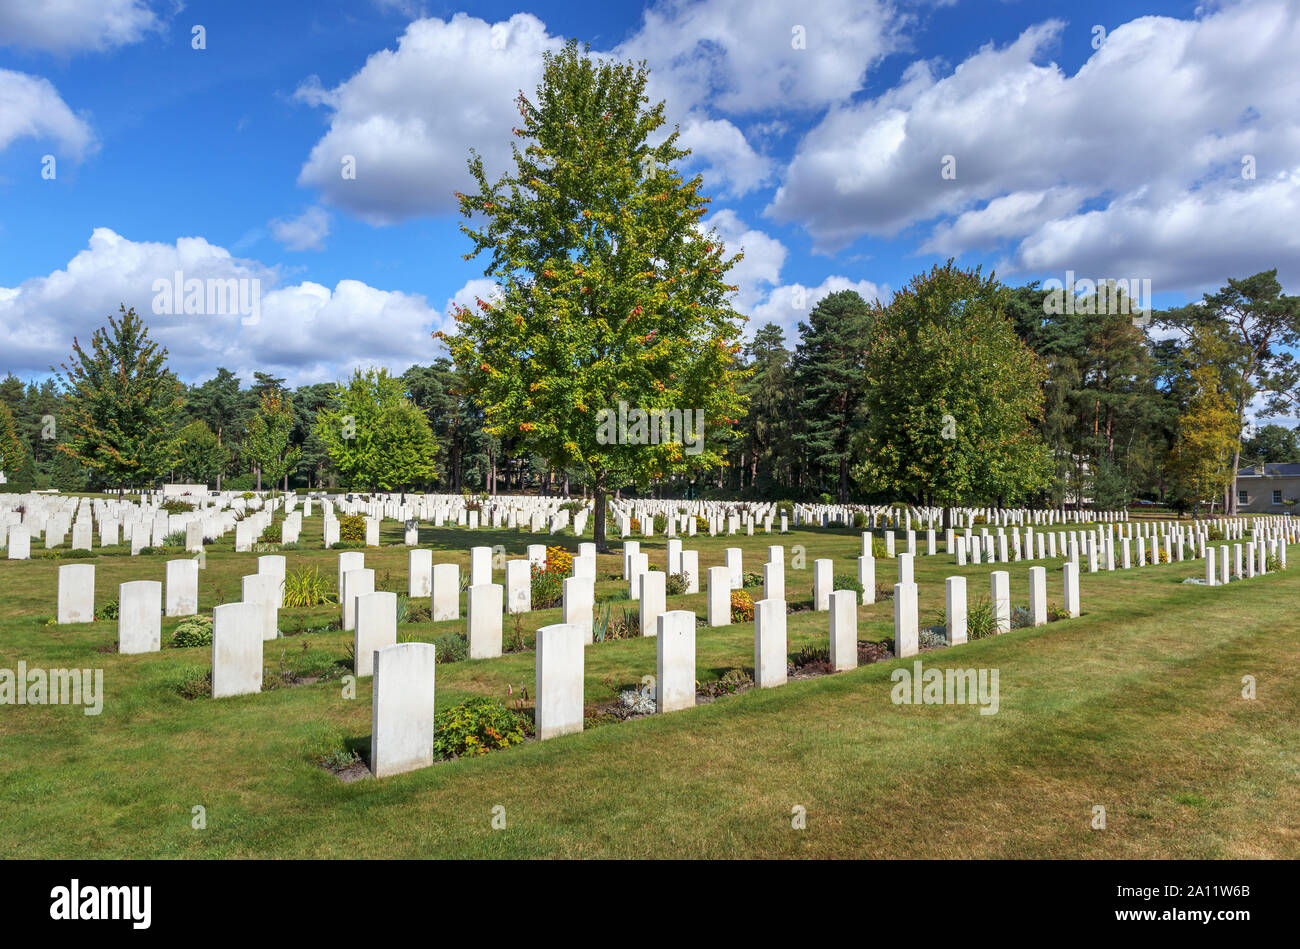 Rows of gravestones in the Canadian Section of the Military Cemetery at Brookwood Cemetery, Pirbright, Woking, Surrey, southeast England, UK Stock Photo